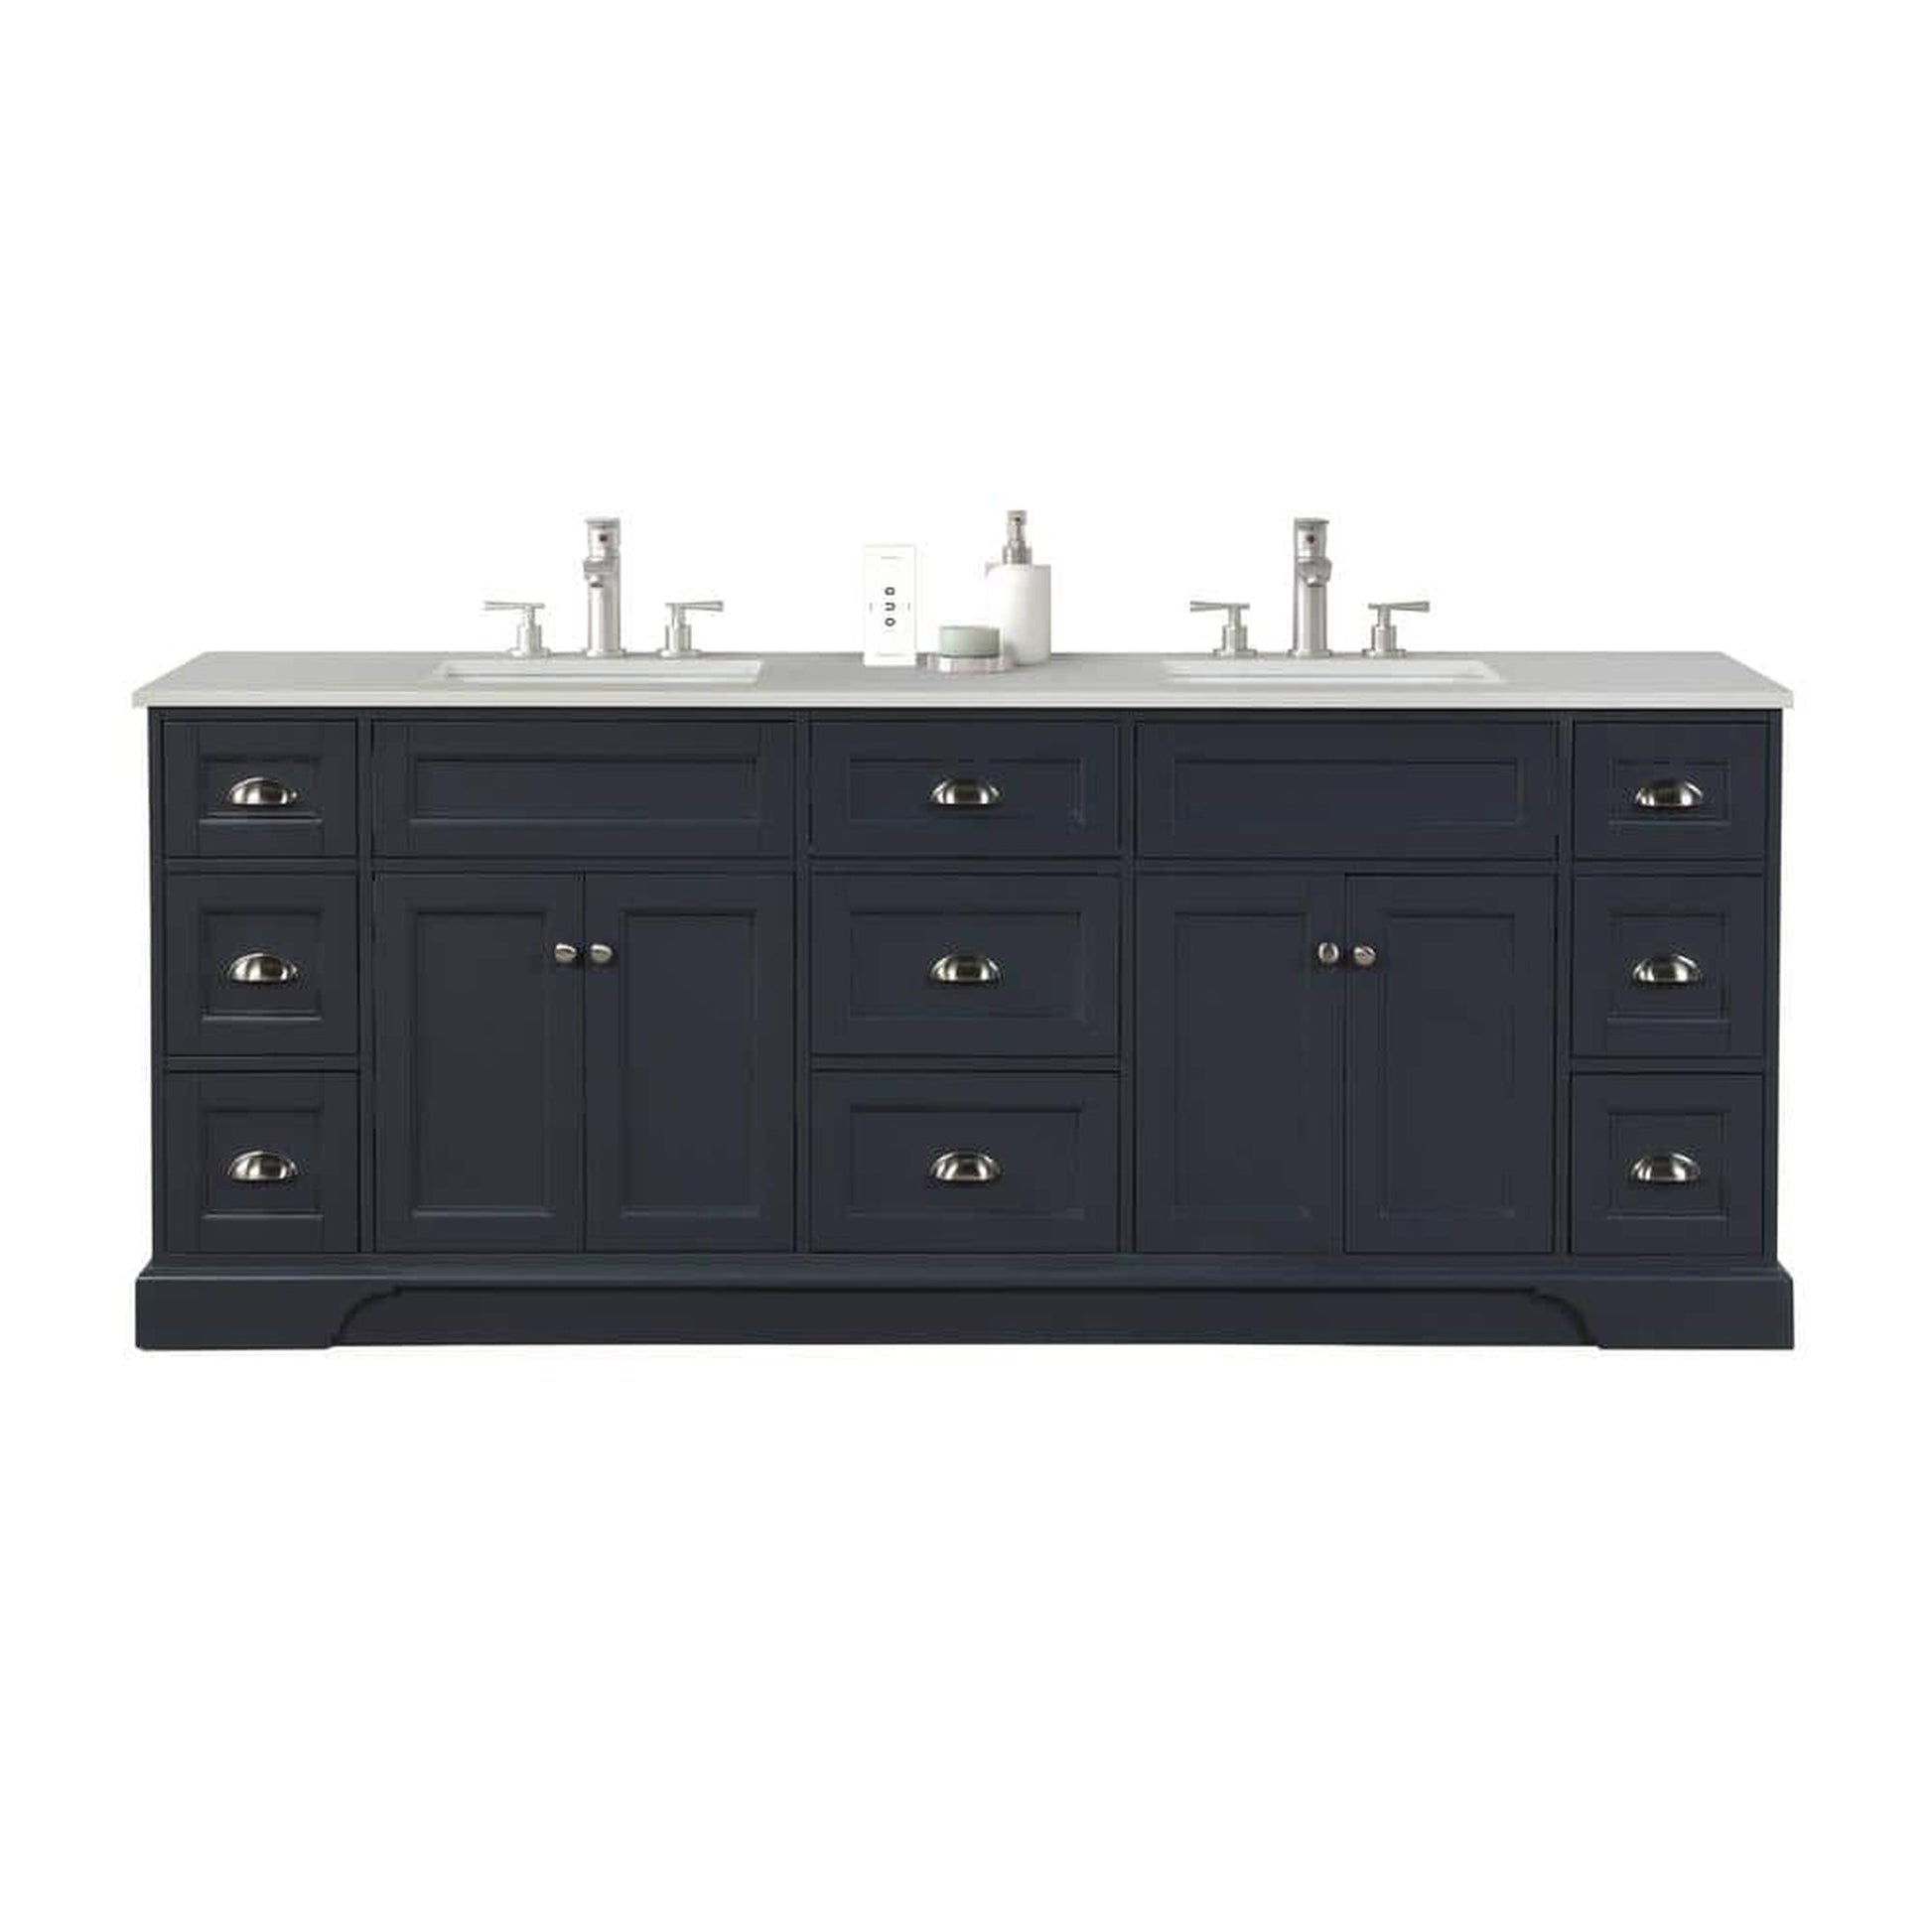 https://usbathstore.com/cdn/shop/products/Eviva-Epic-84-x-34-Charcoal-Gray-Freestanding-Bathroom-Vanity-With-Brushed-Nickel-Hardware-and-Quartz-Countertop-With-Double-Undermount-Sink.jpg?v=1678864735&width=1946